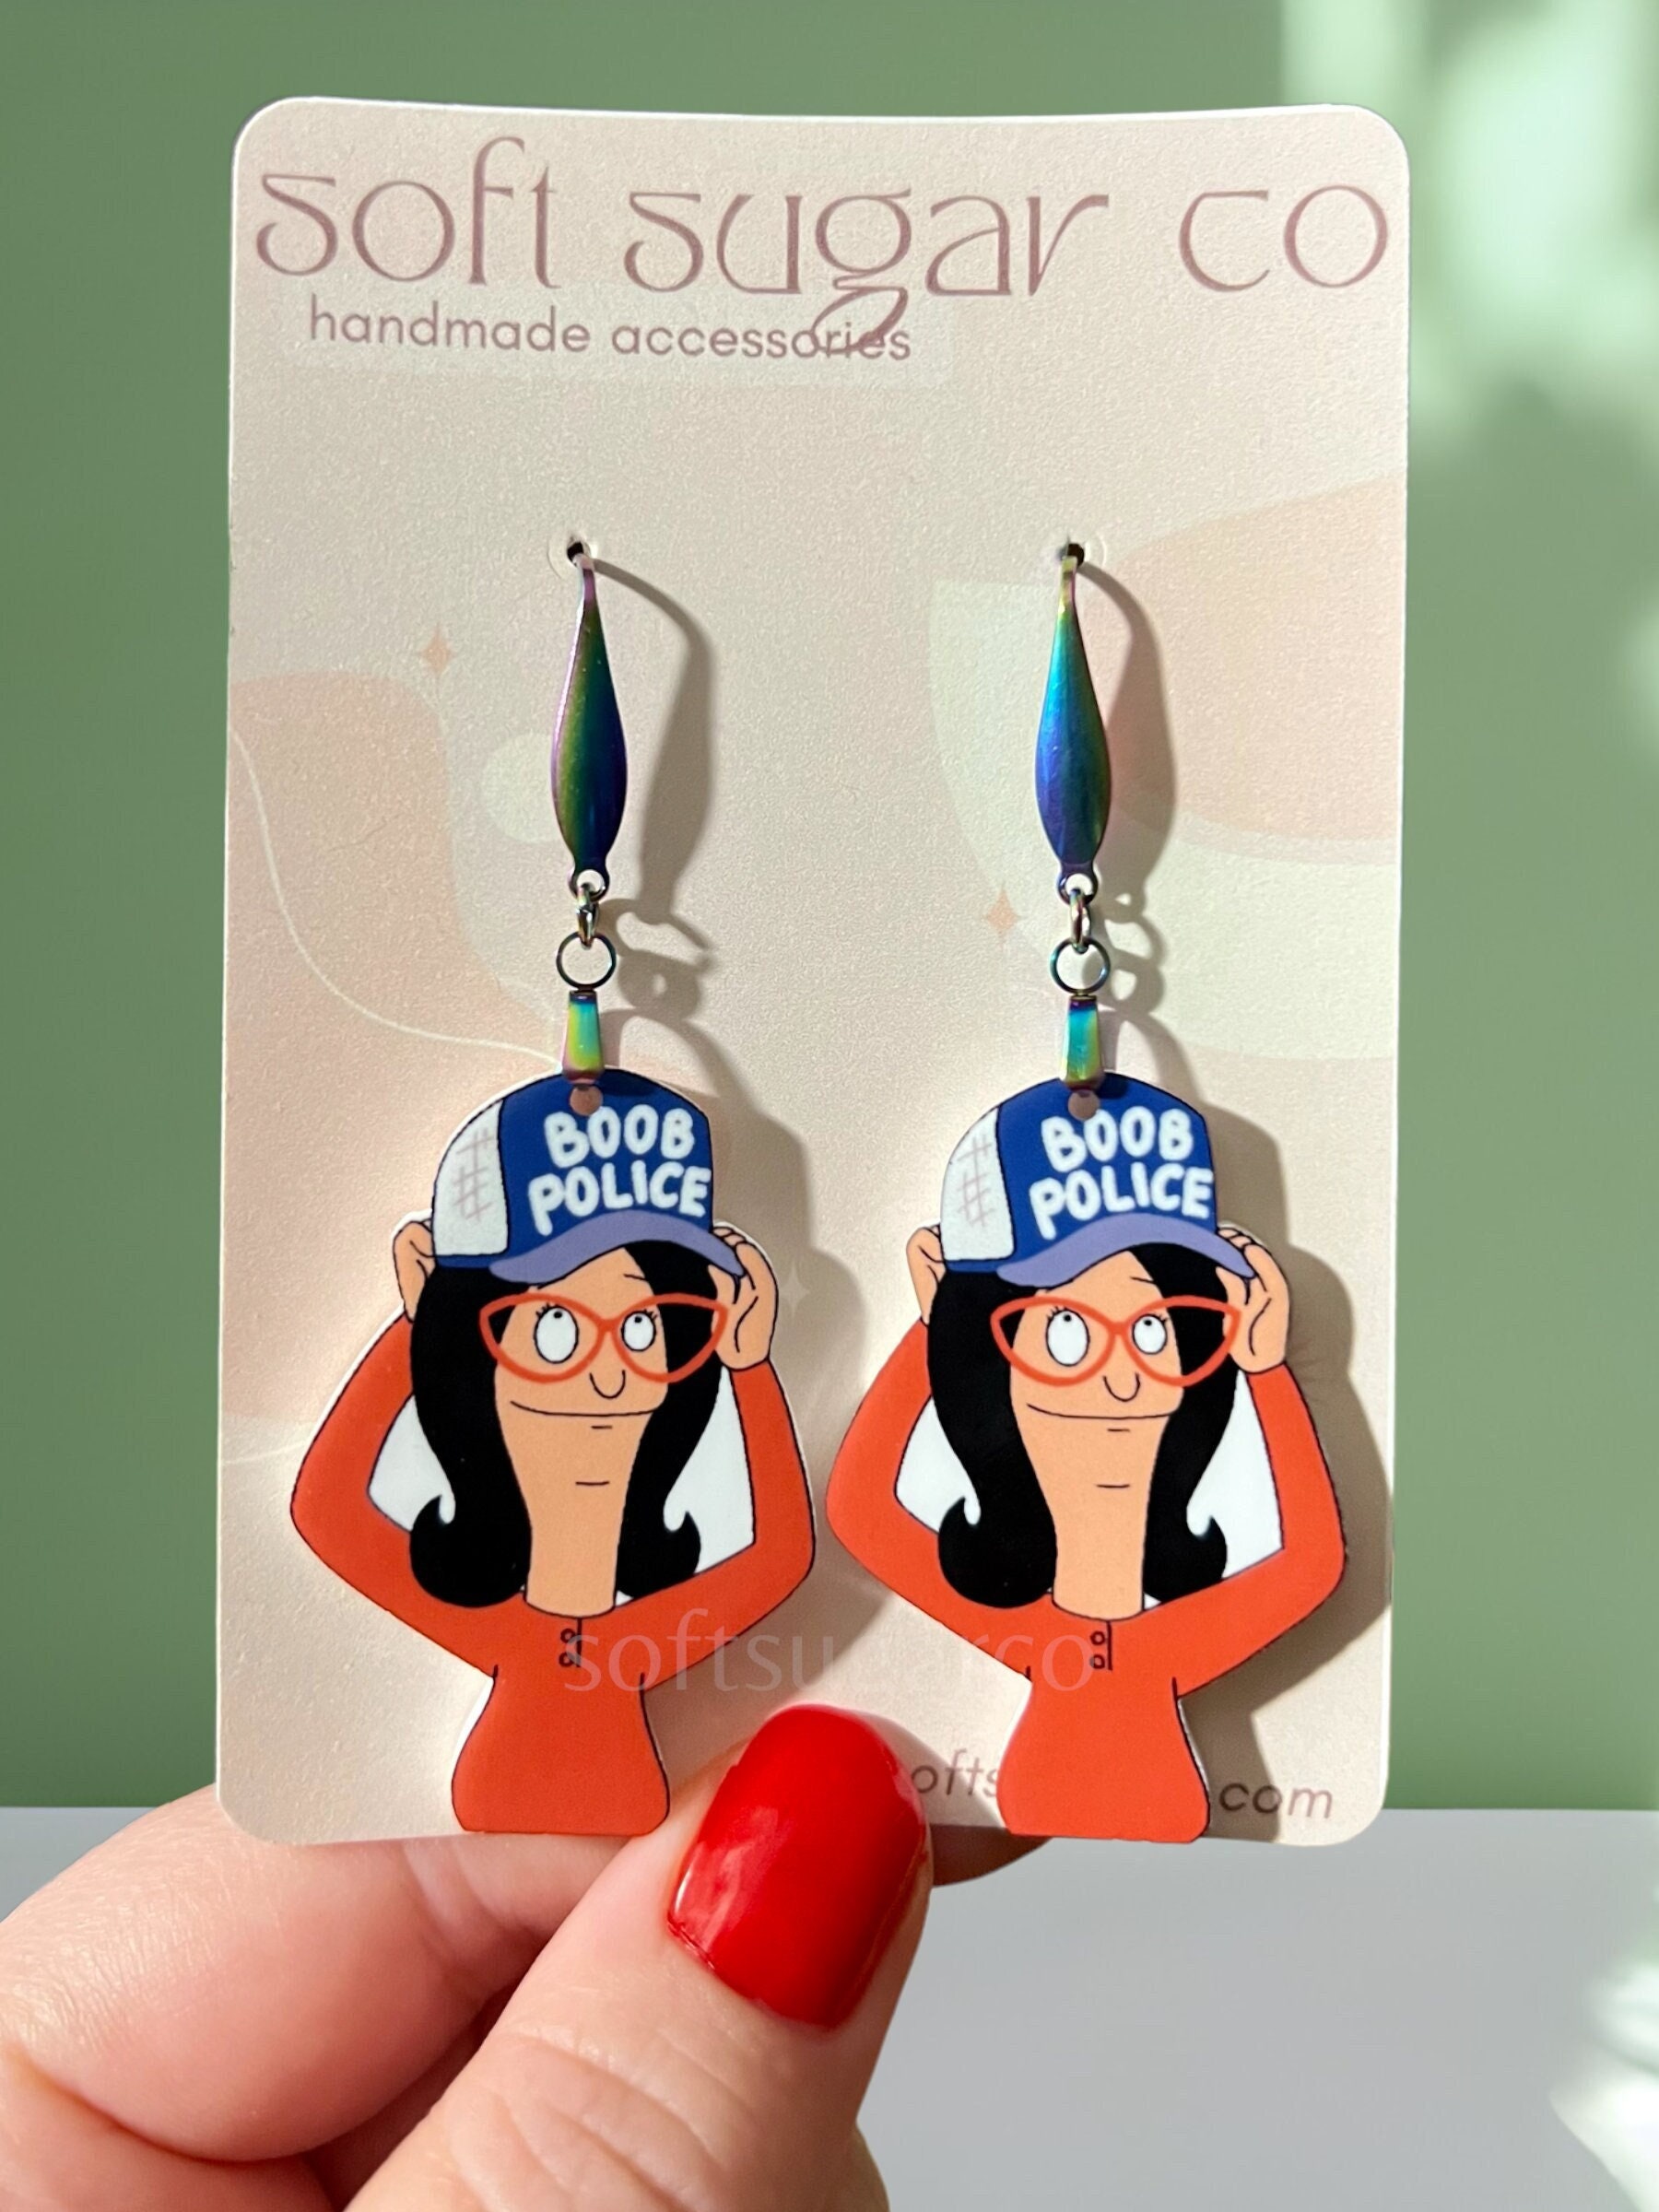 Bob's Burgers Louise & Tina Belcher Upcycled Earrings